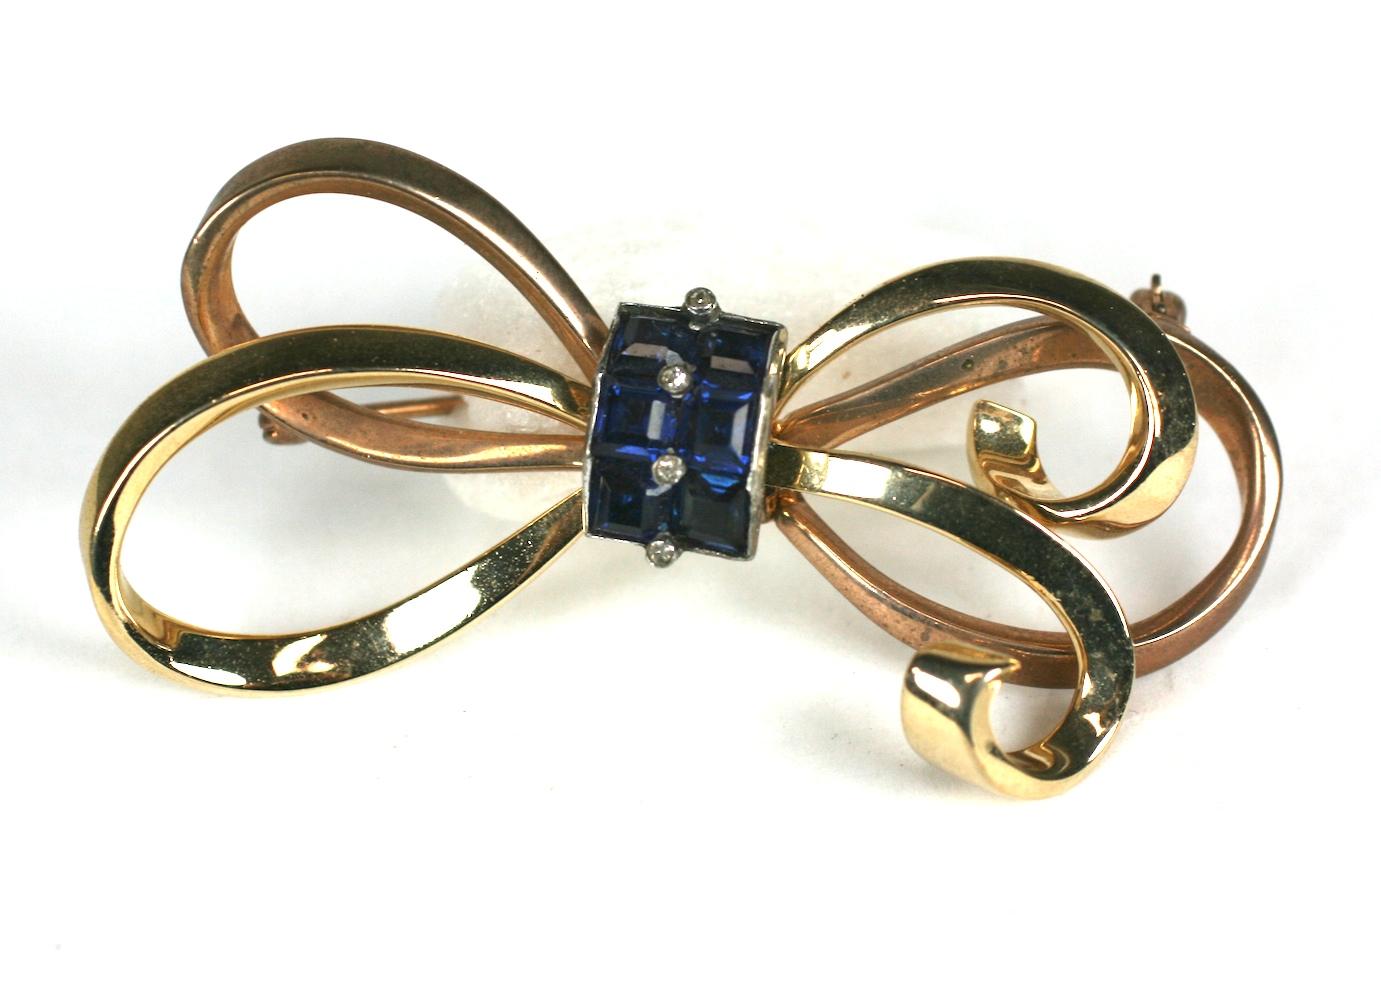 Mazer 2 toned (pink/gold) washed sterling silver Retro bow knot brooch. The bow loops held by calibre faux sapphire squares and crystal pastes,
Excellent Condition Signed Mazer, Sterling. 1940's USA.
Length 3